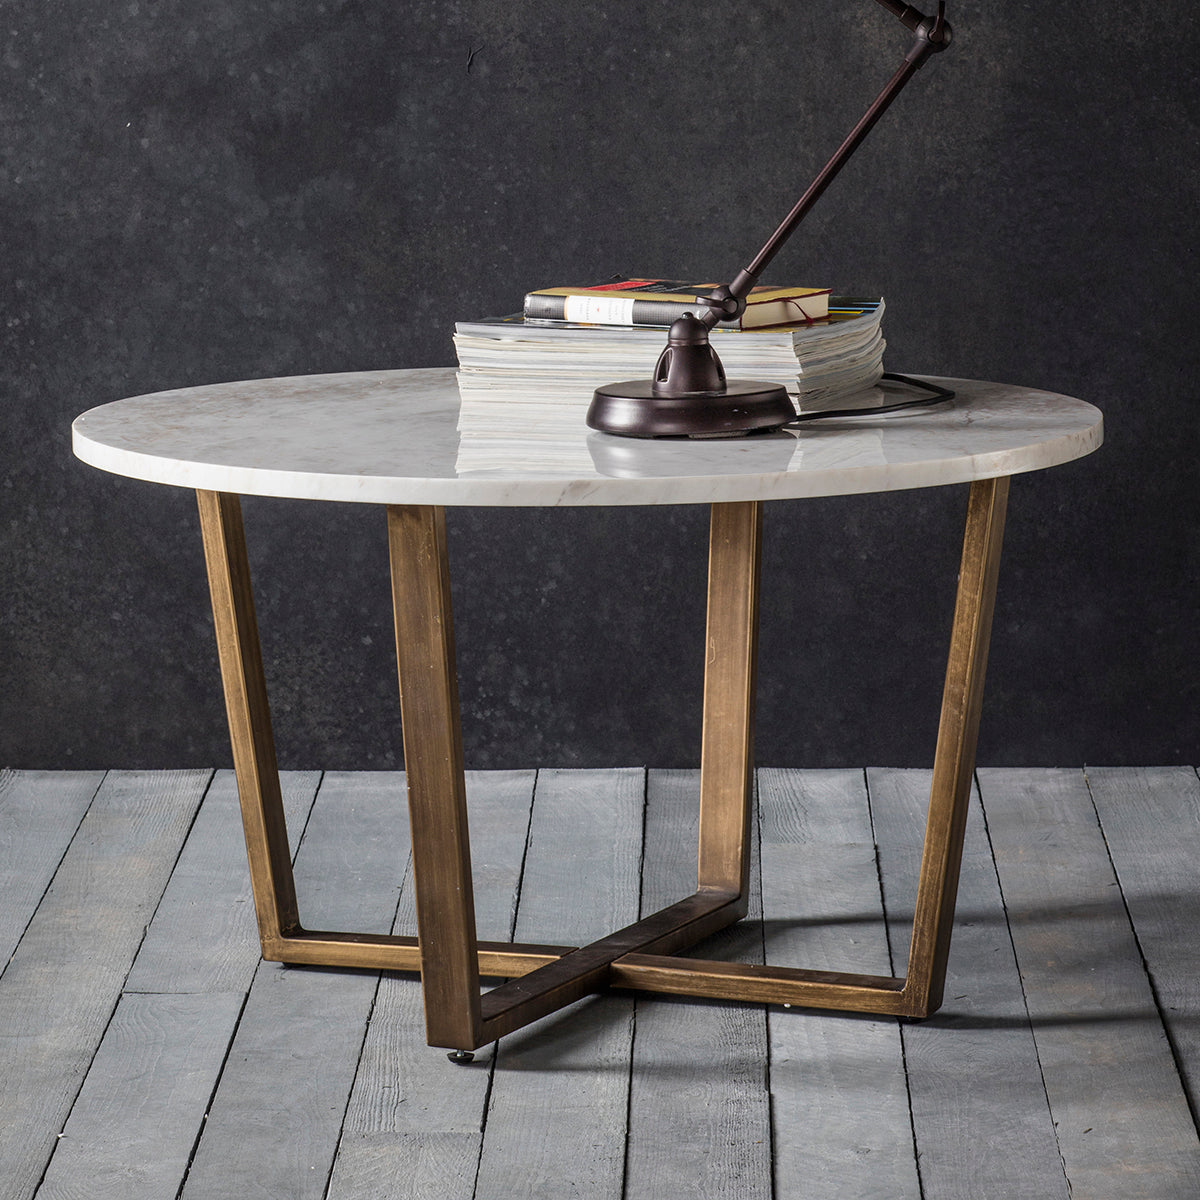 A Hallsand round marble coffee table with wooden legs for interior decor.